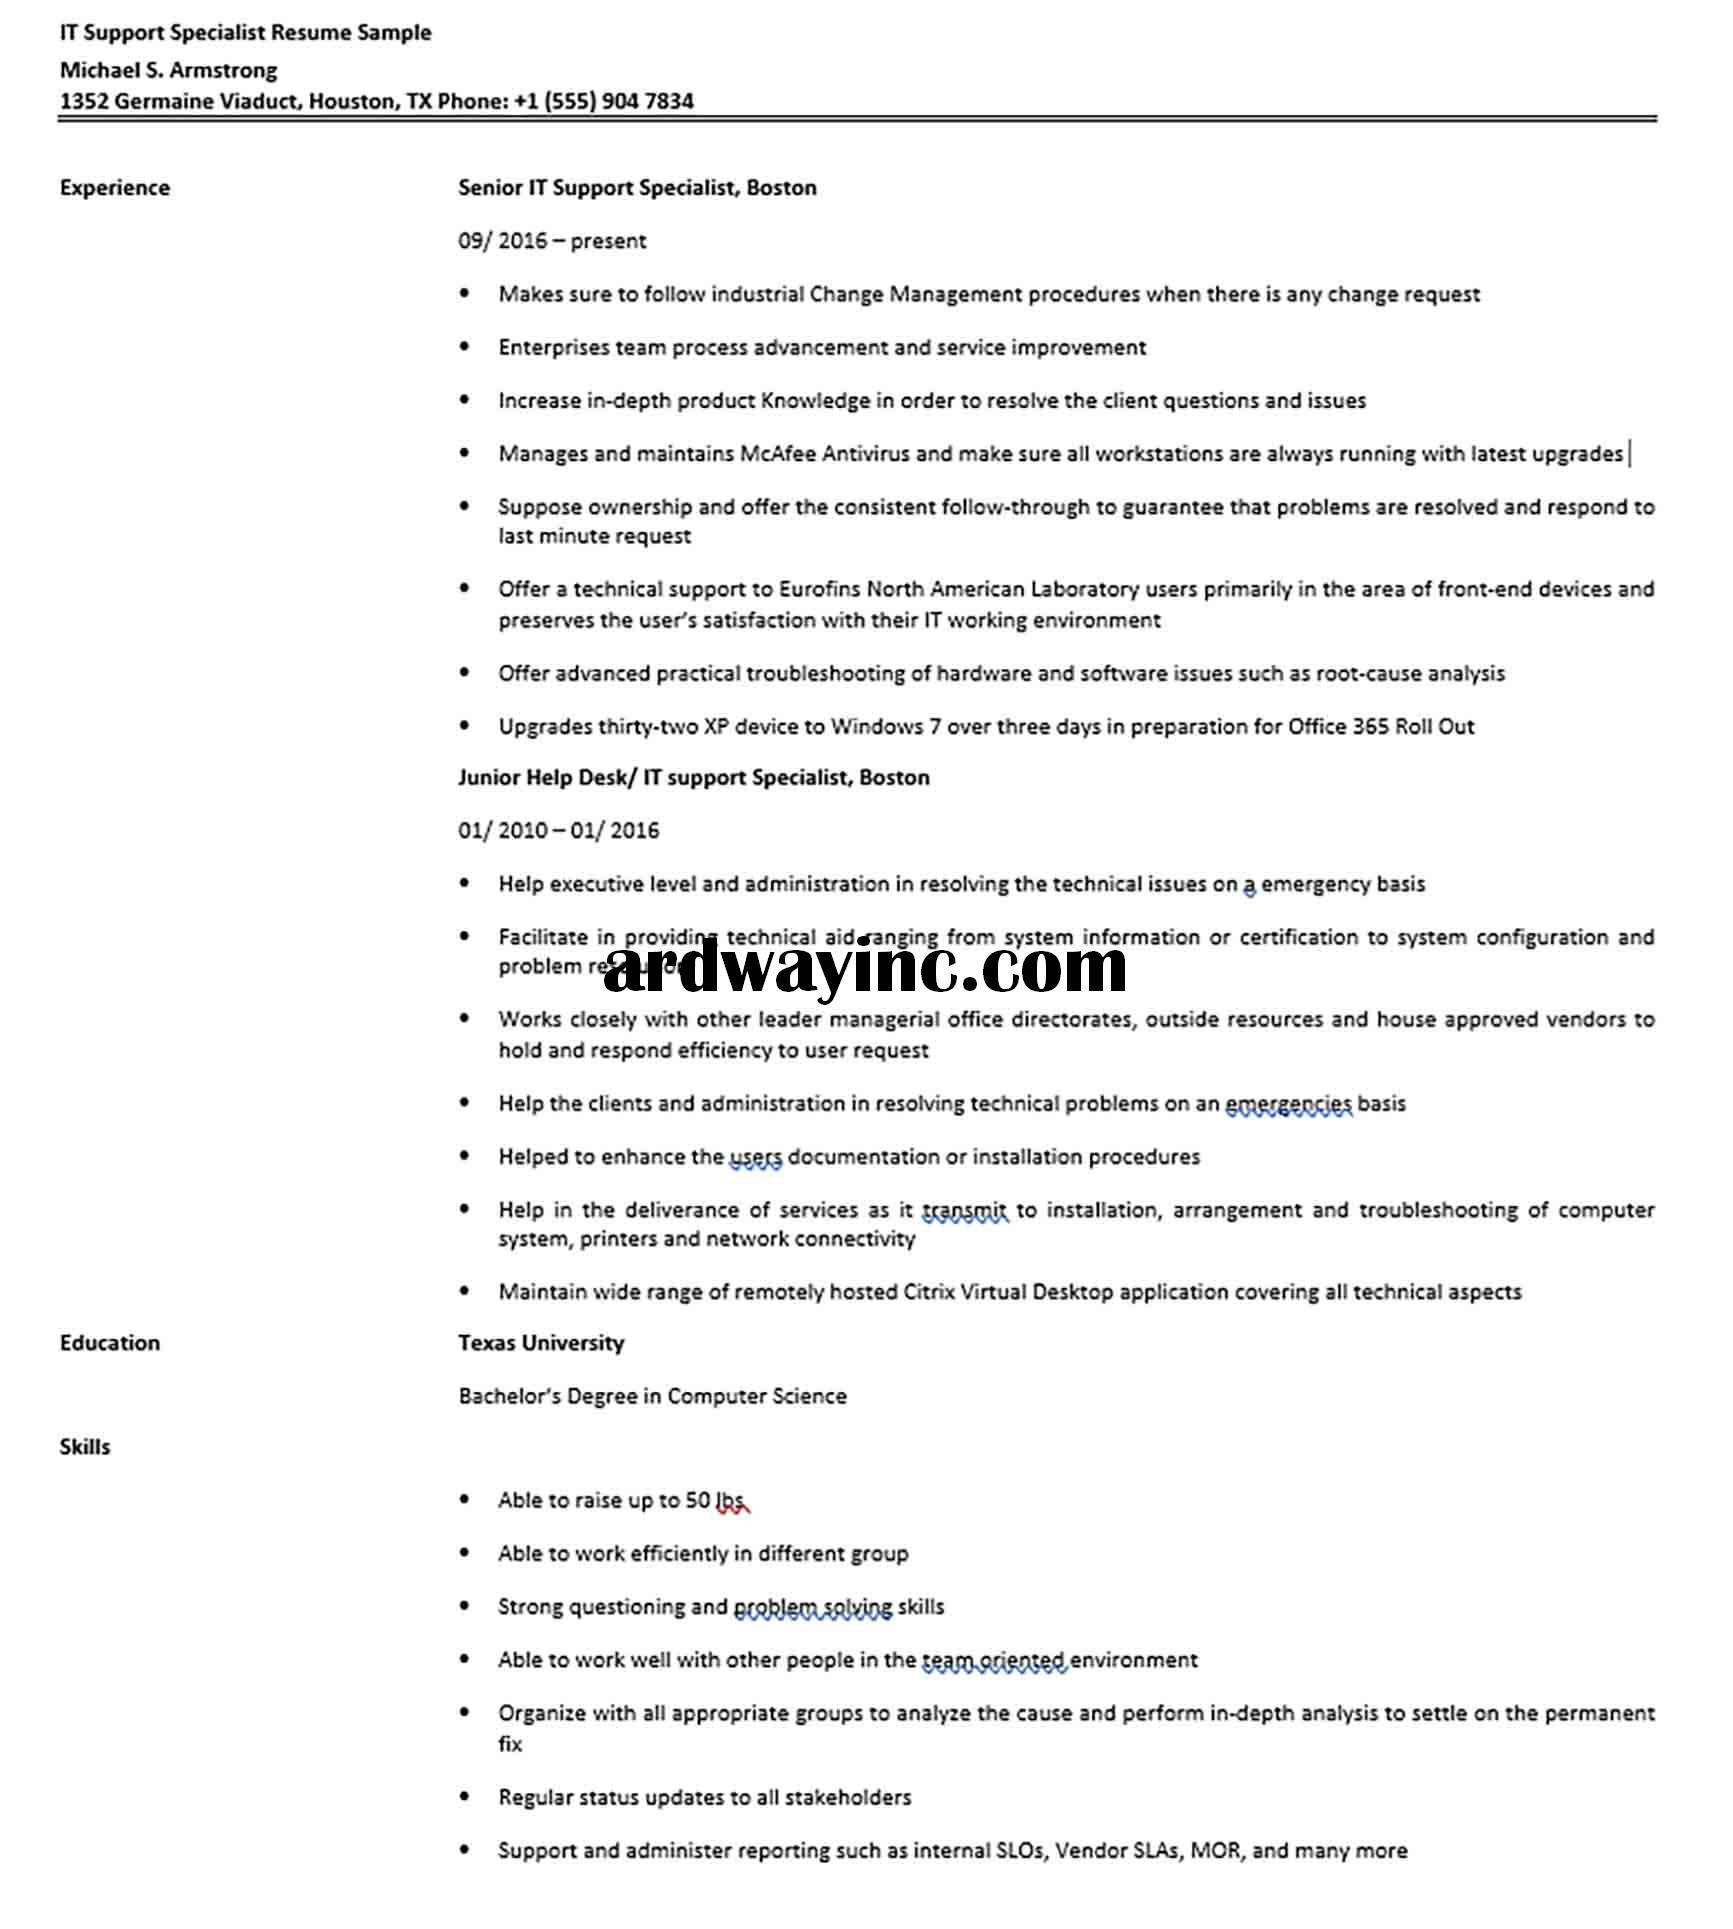 IT Support Specialist Resume Sample